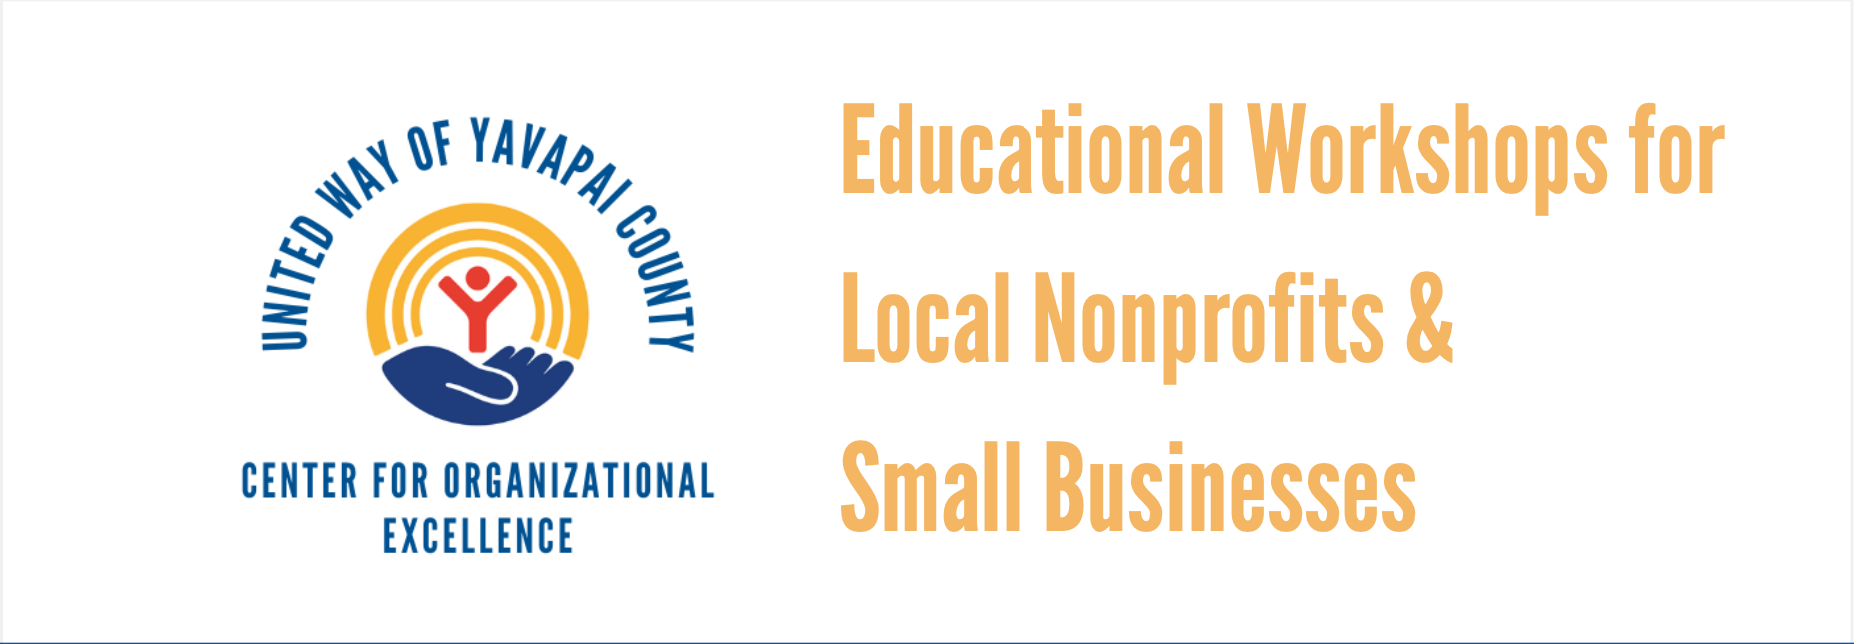 Educational Workshops for Non Profits in Yavapai County